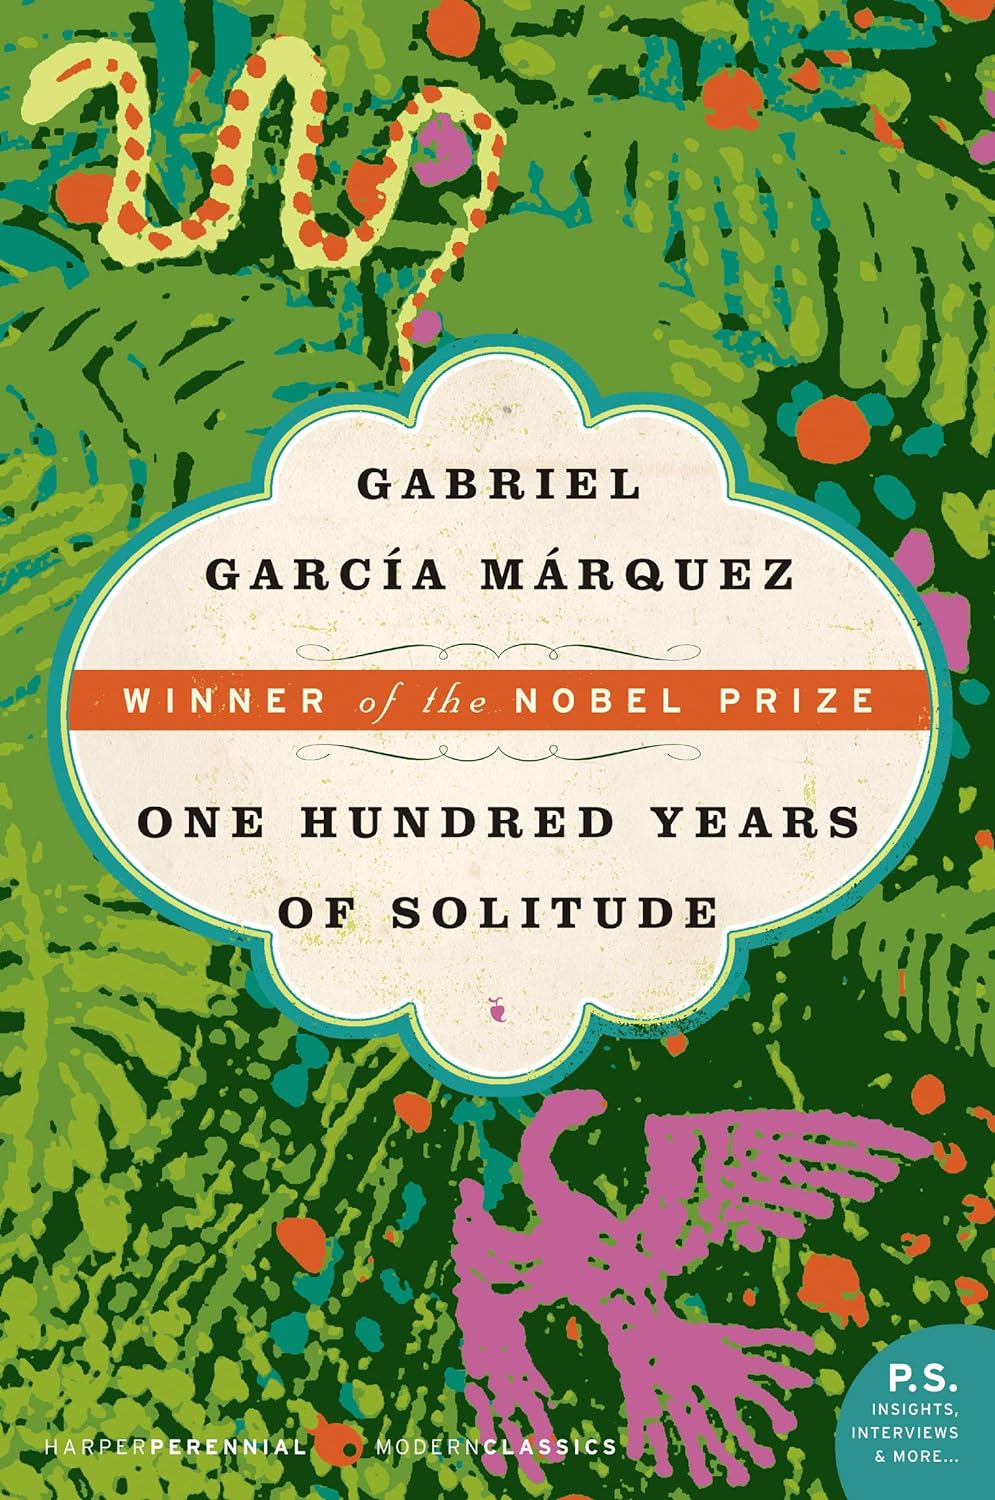 “One Hundred Years of Solitude” by Gabriel García Márquez